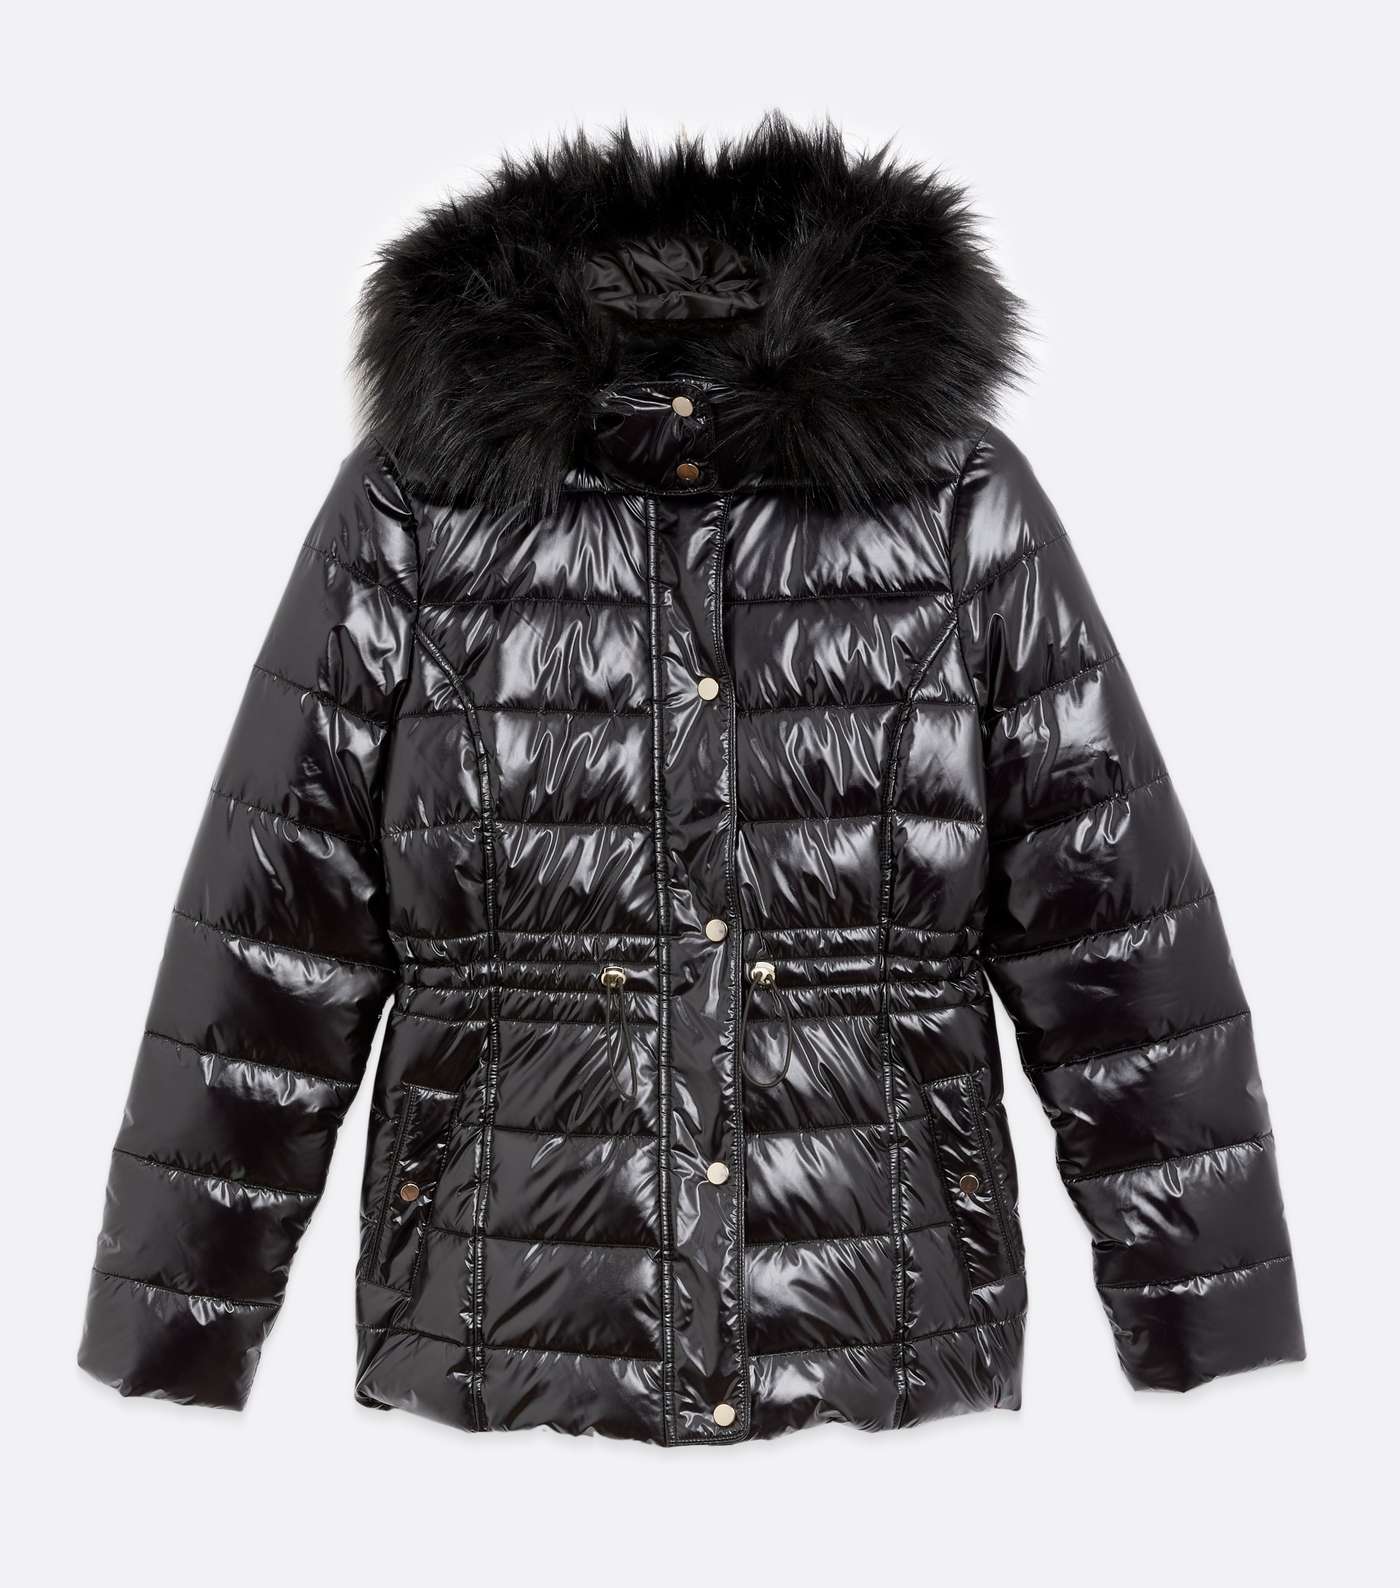 Tall Black Hooded Wet Look Puffer Jacket Image 5